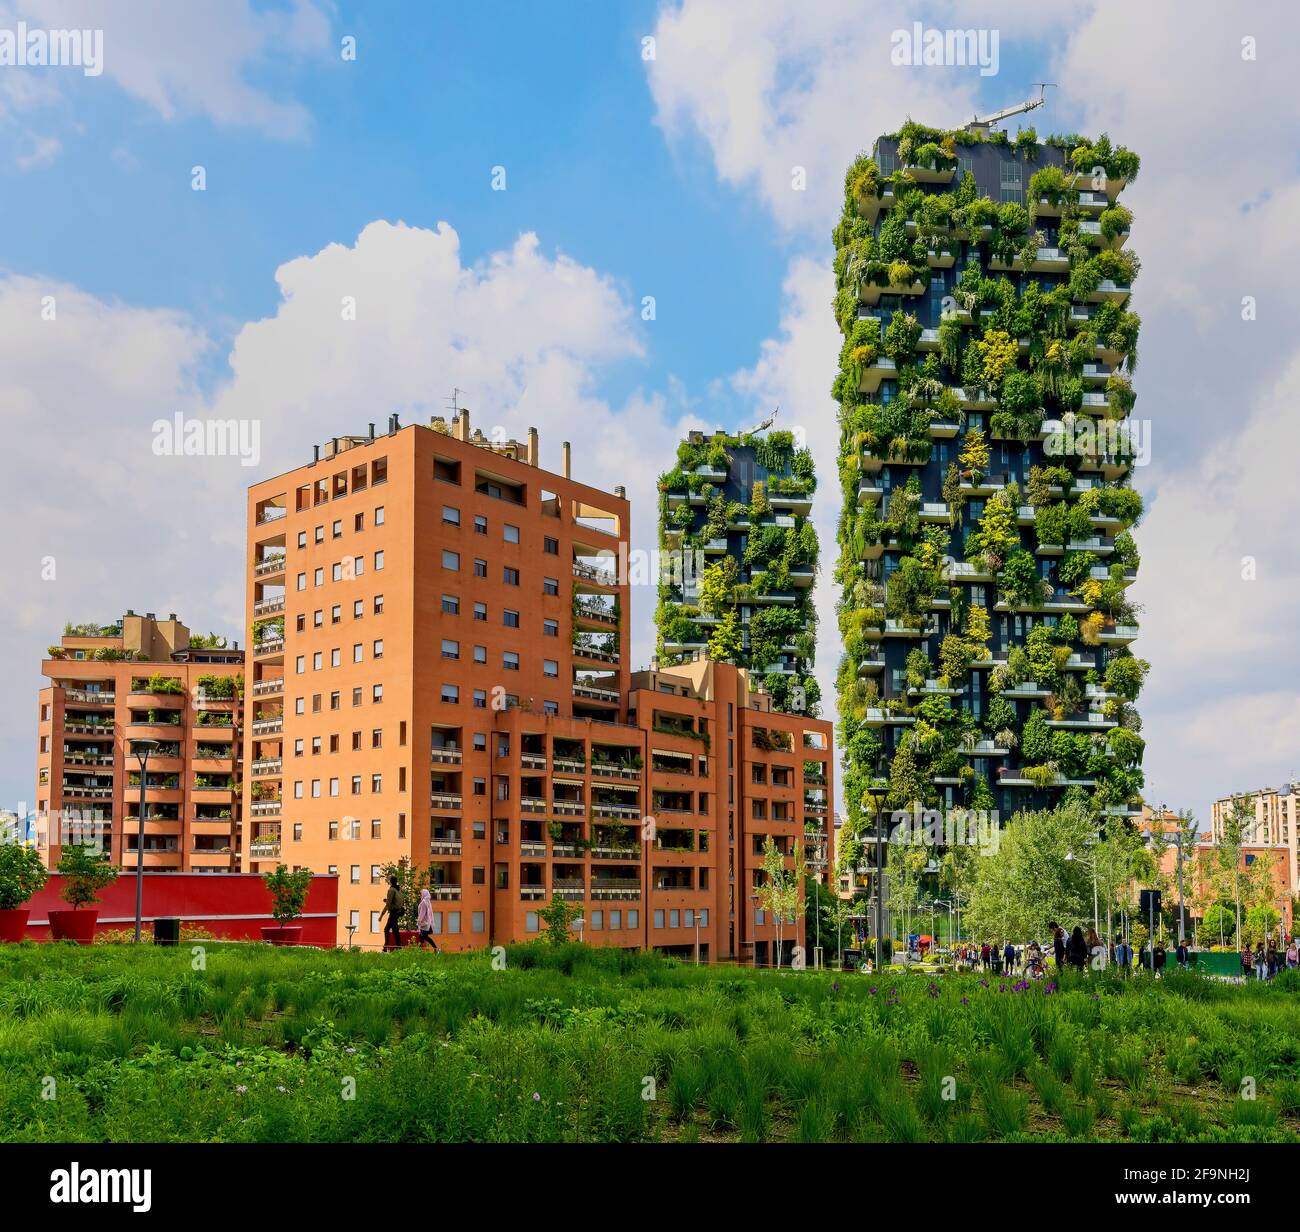 Hotel Porta Nuova, Bosco verticale, verticale immeubles forestiers, Milan, Italie. Banque D'Images